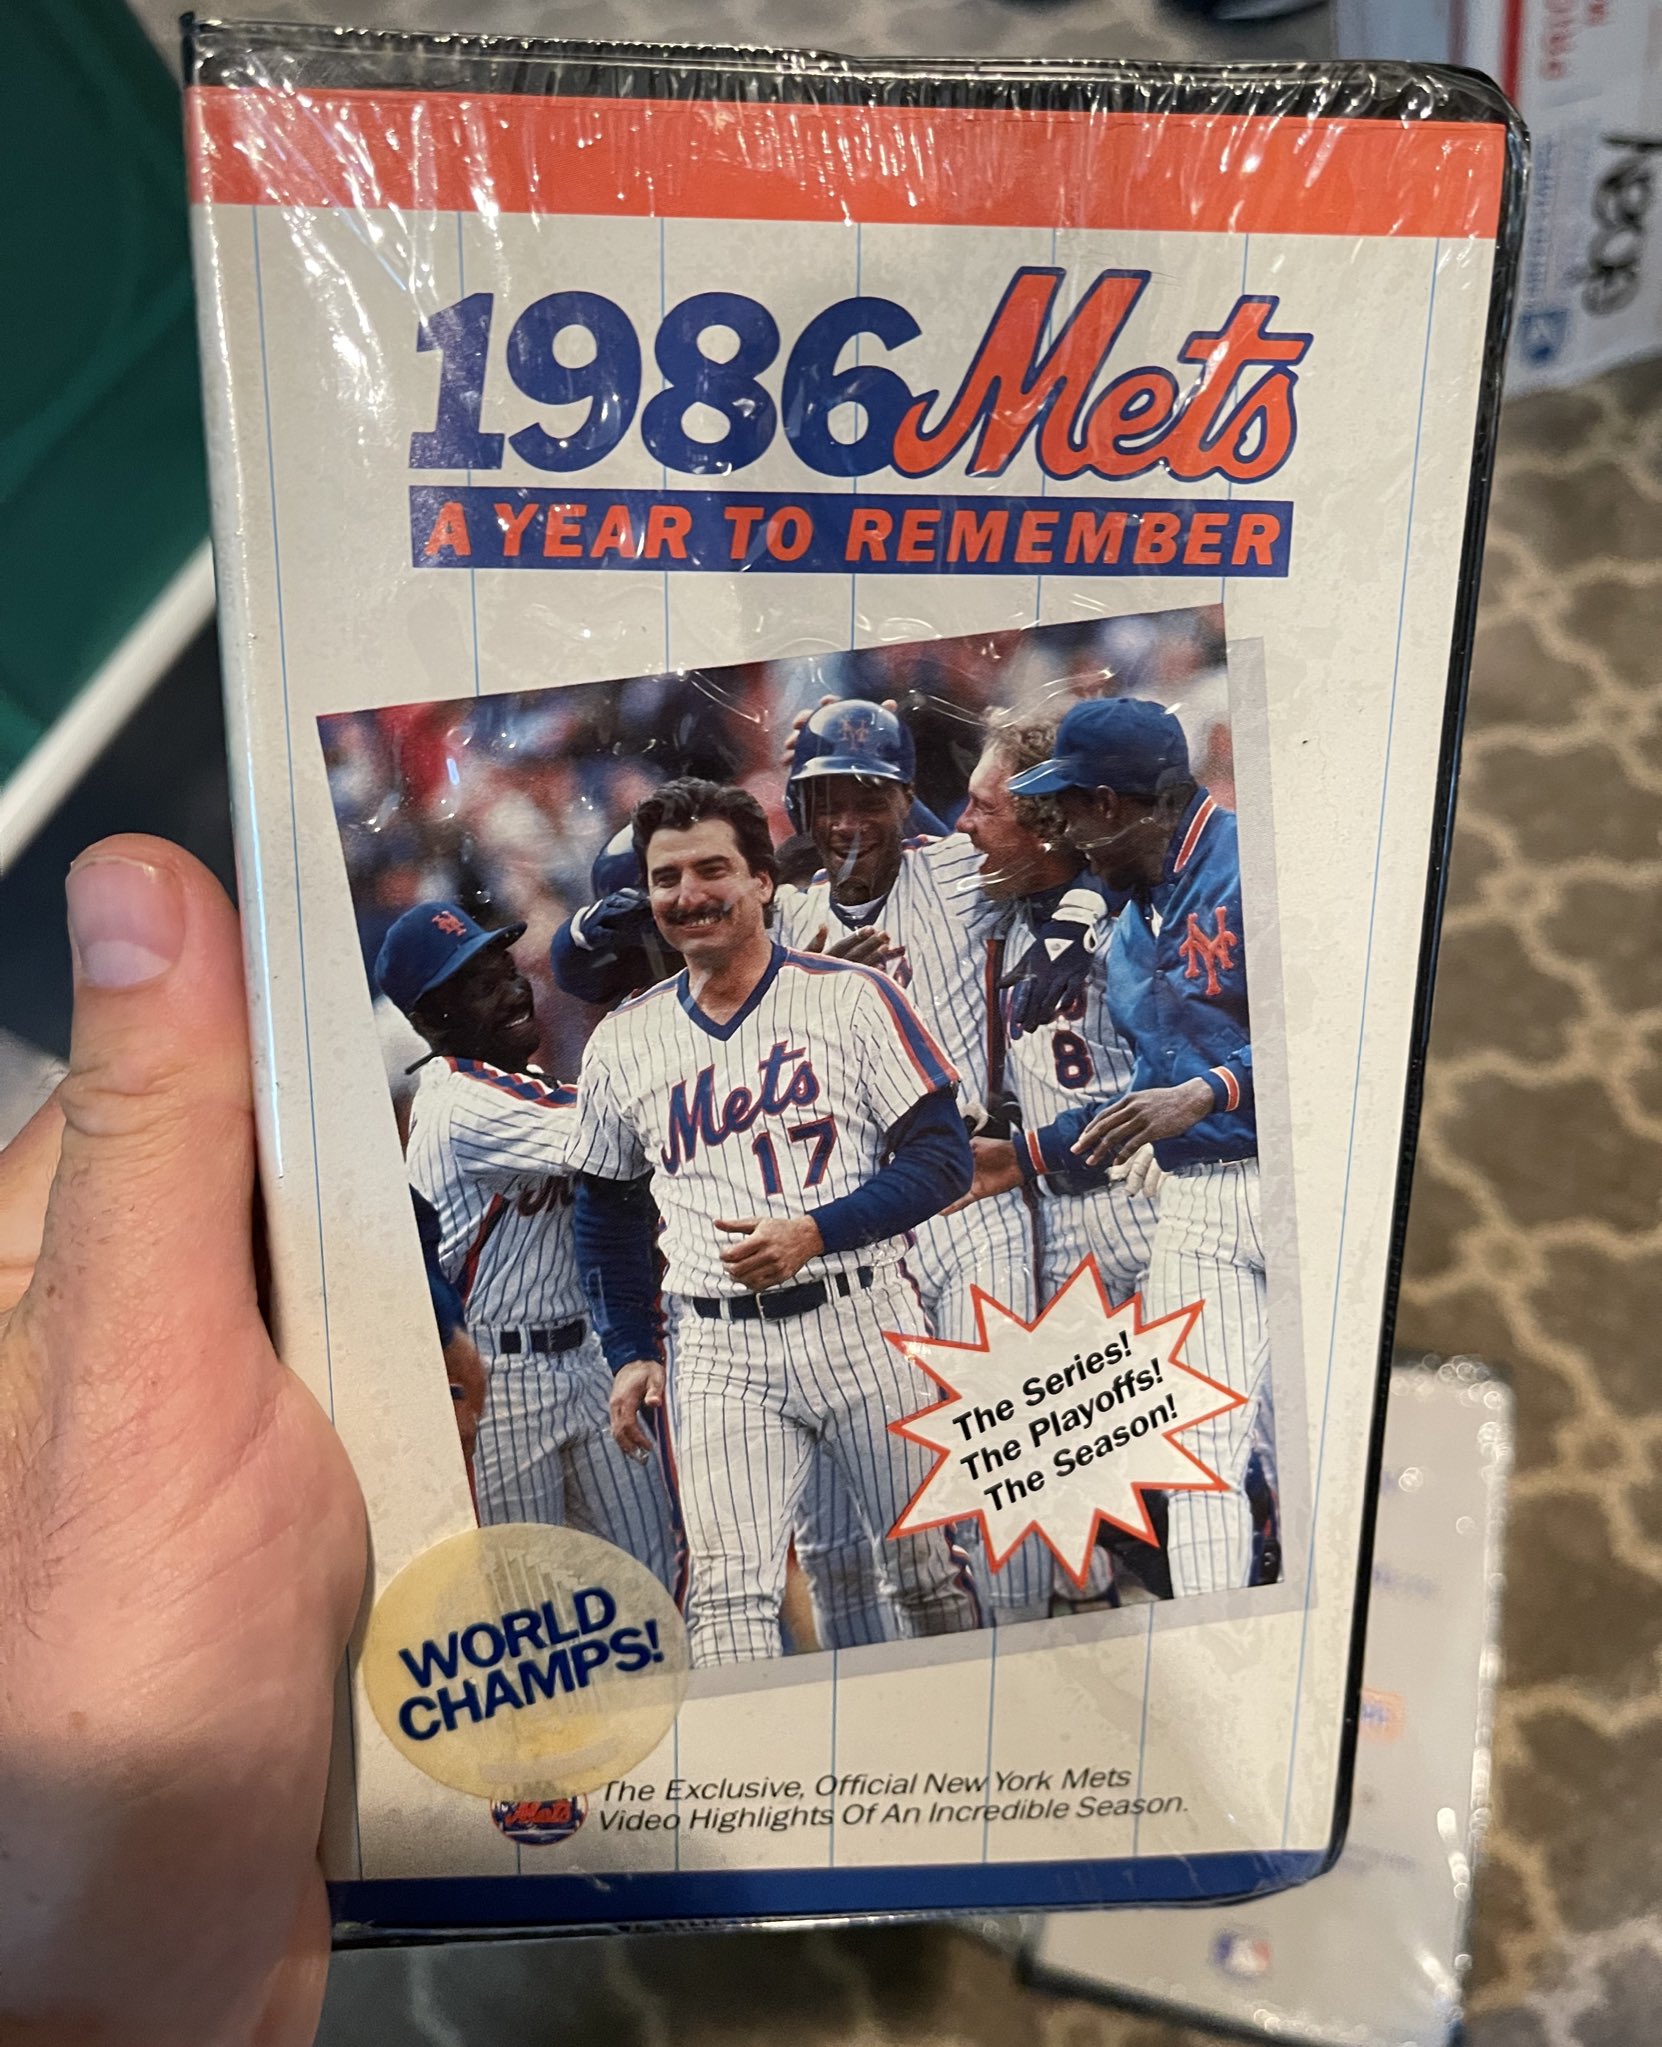 Darren Rovell on Twitter: "Excited for 1986 Mets “30 for 30” tonight. bought the highlights videos in sealed https://t.co/iwfhGDwdR0" / Twitter